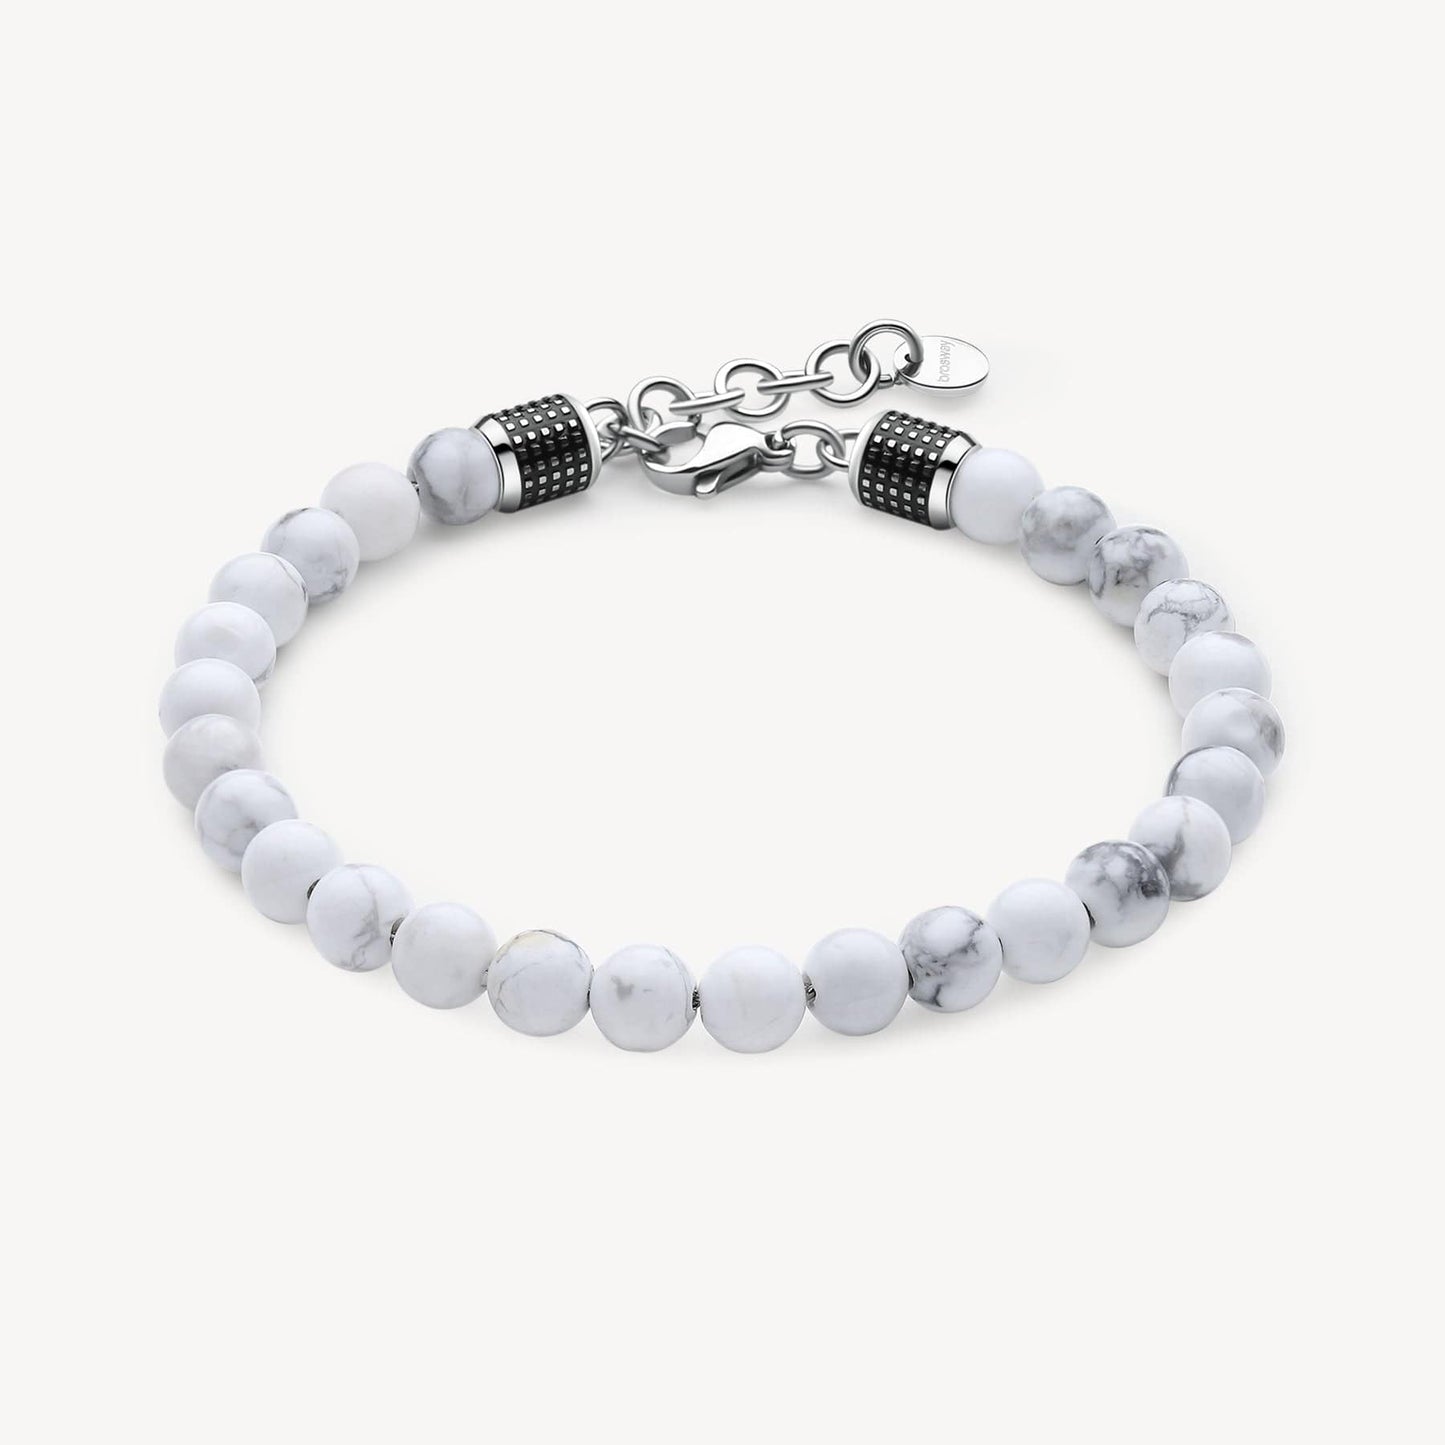 BRC-SS Stainless Steel and Owite Bead Bracelet